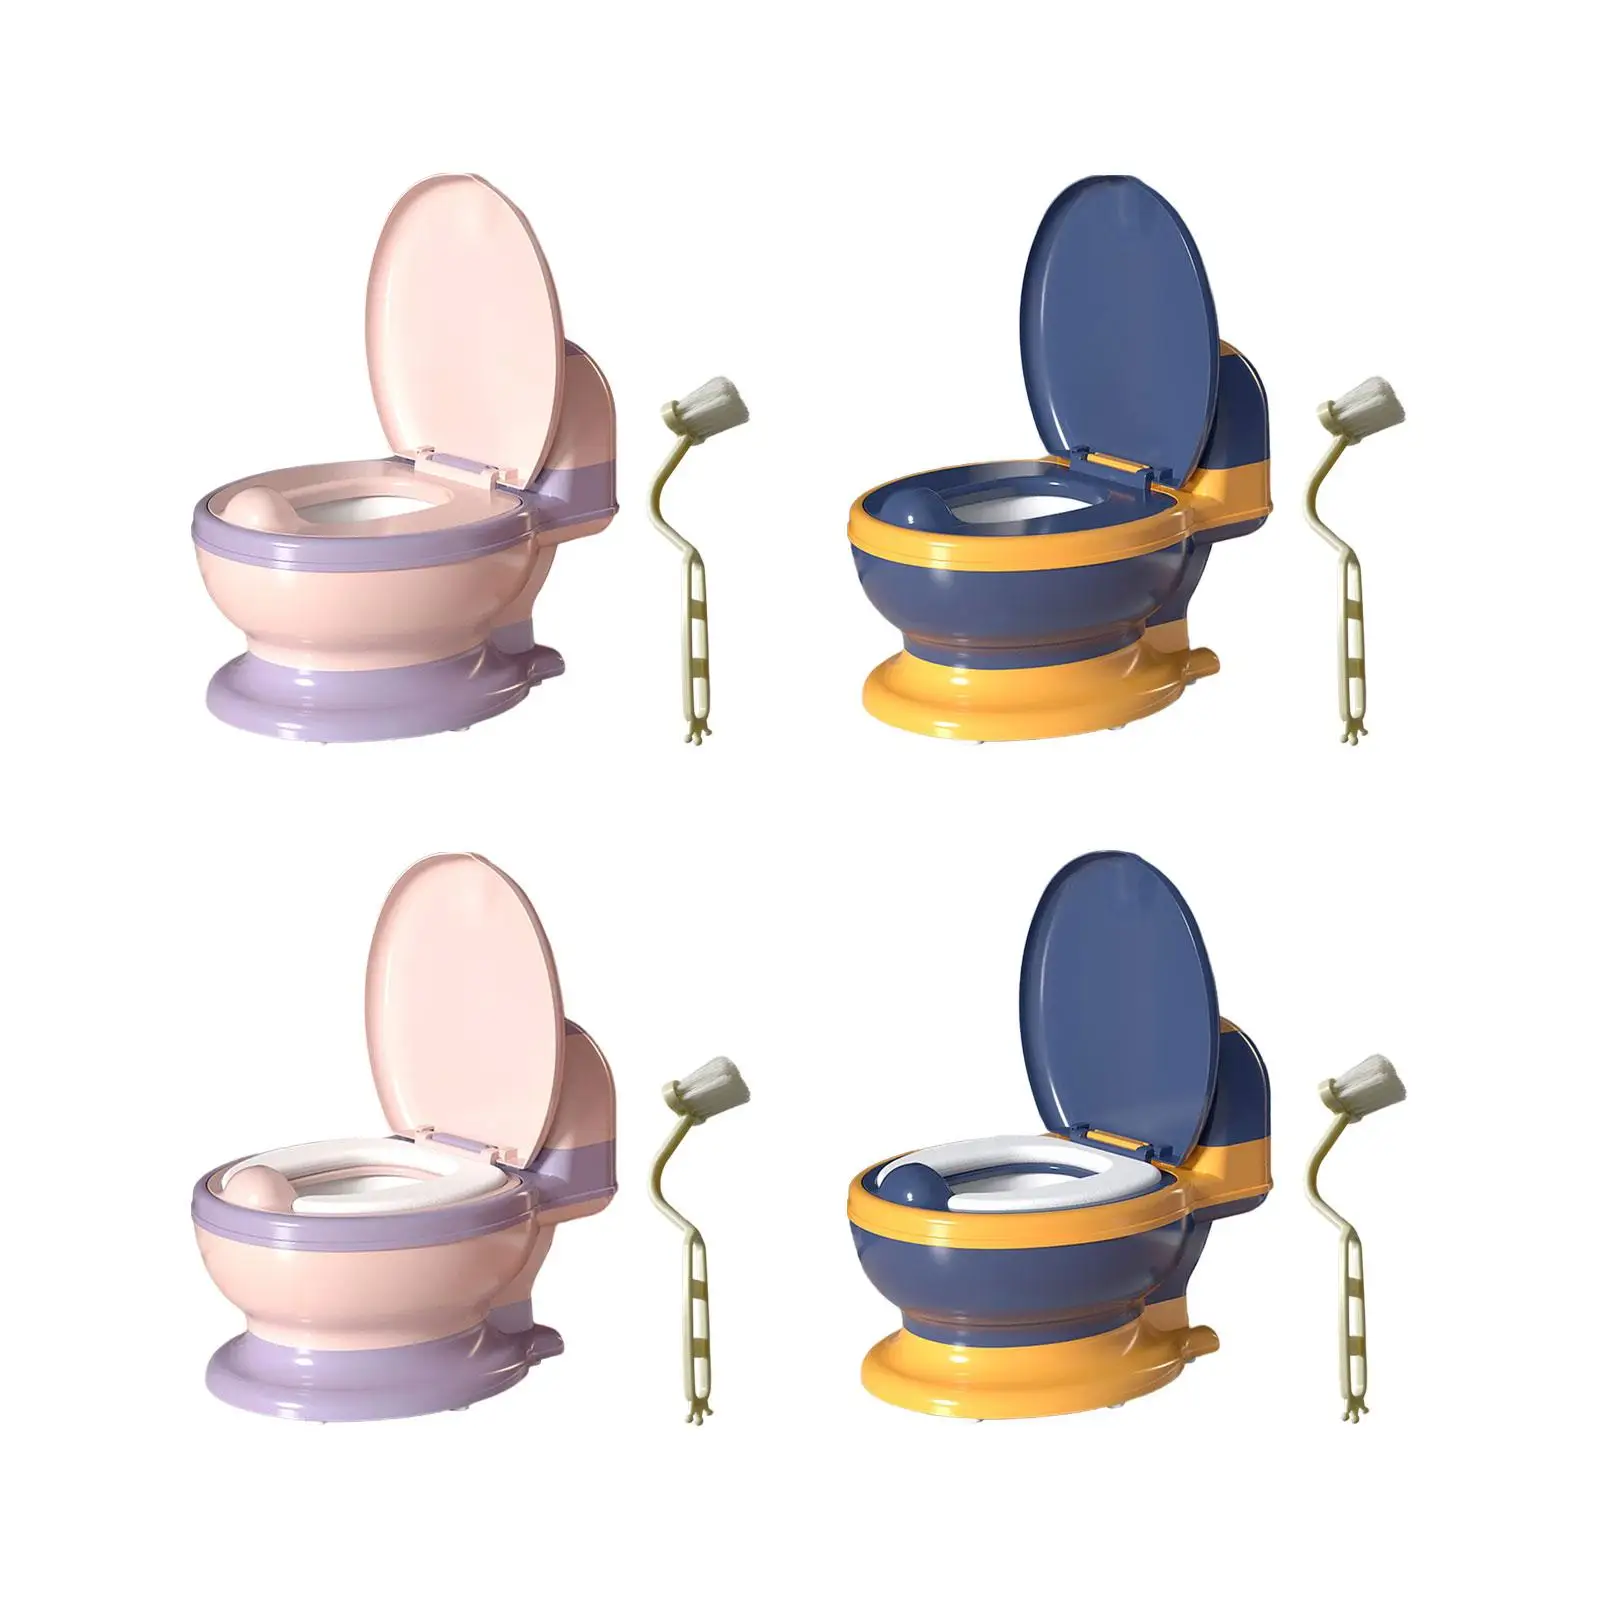 Toilet Training Potty (Brush Included) Realistic Toilet Infants Kids